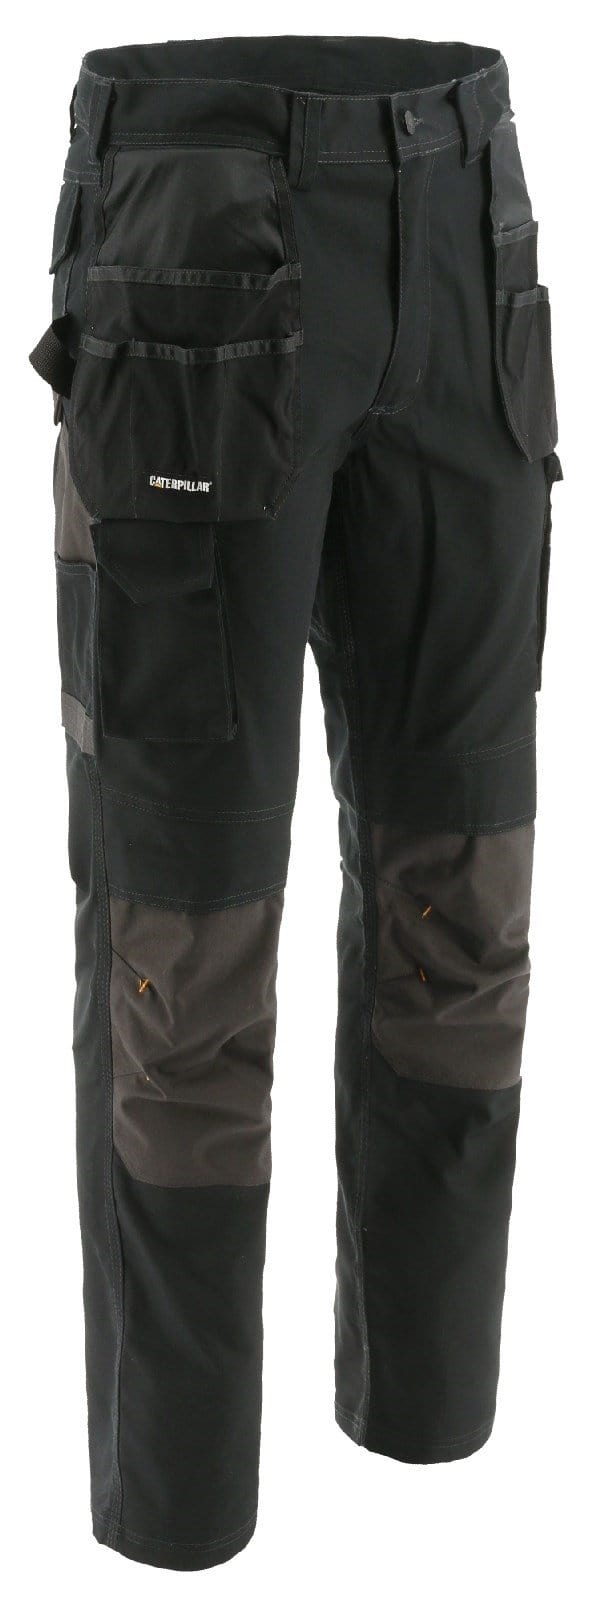 Essentials Knee Pocket Work Trouser - The Boot Company